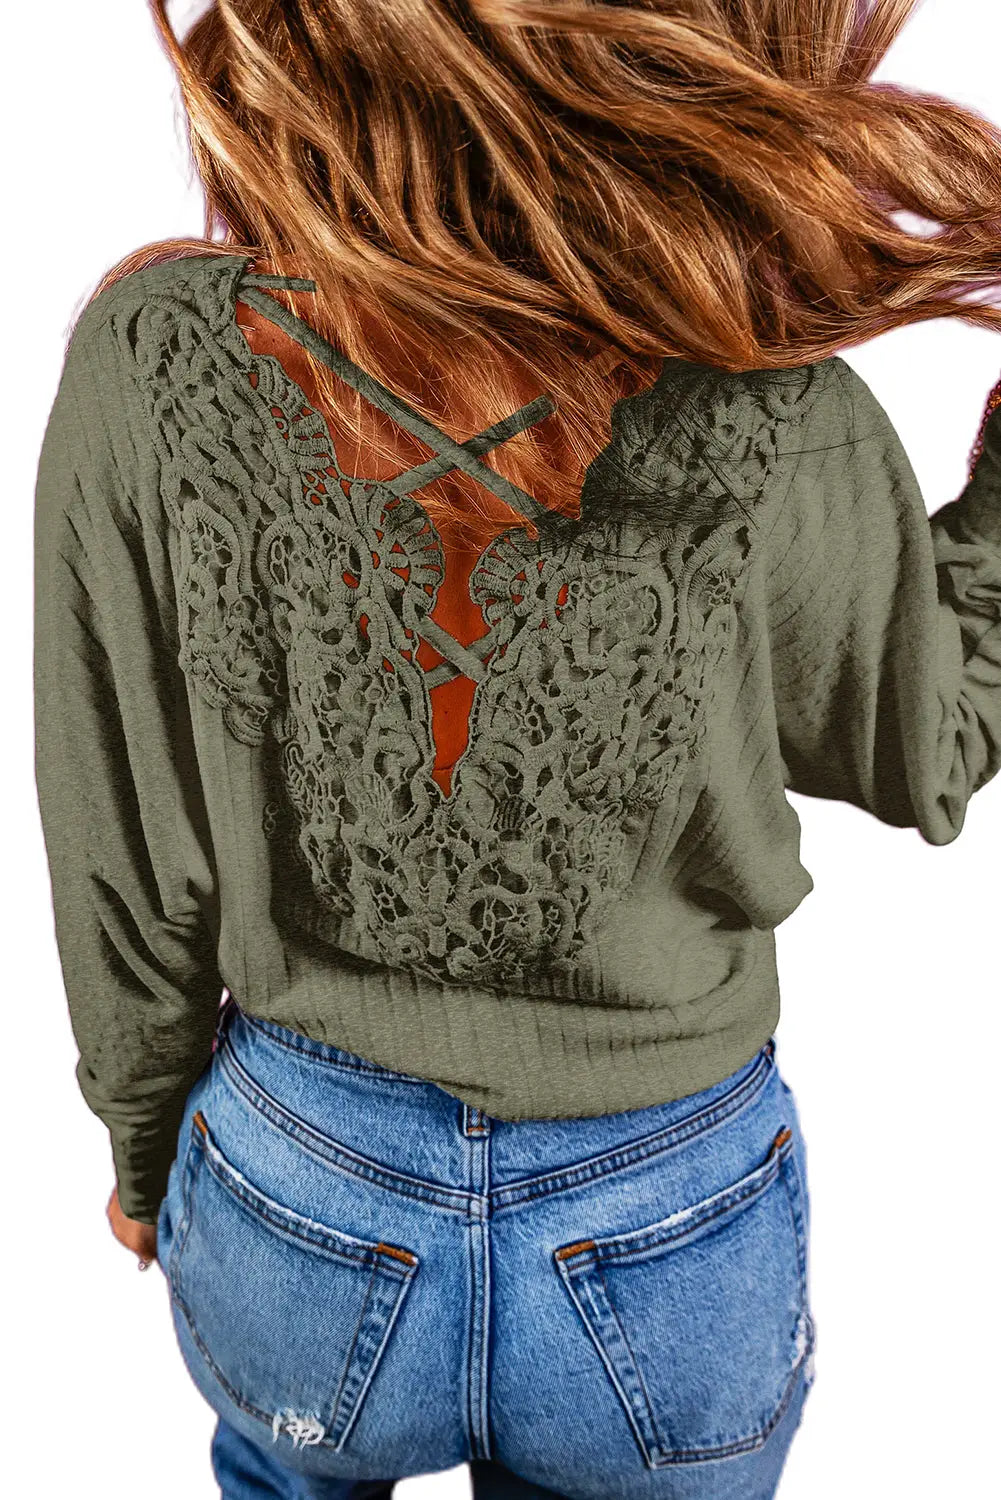 Oatmeal lace-up crochet open back ribbed top - tops